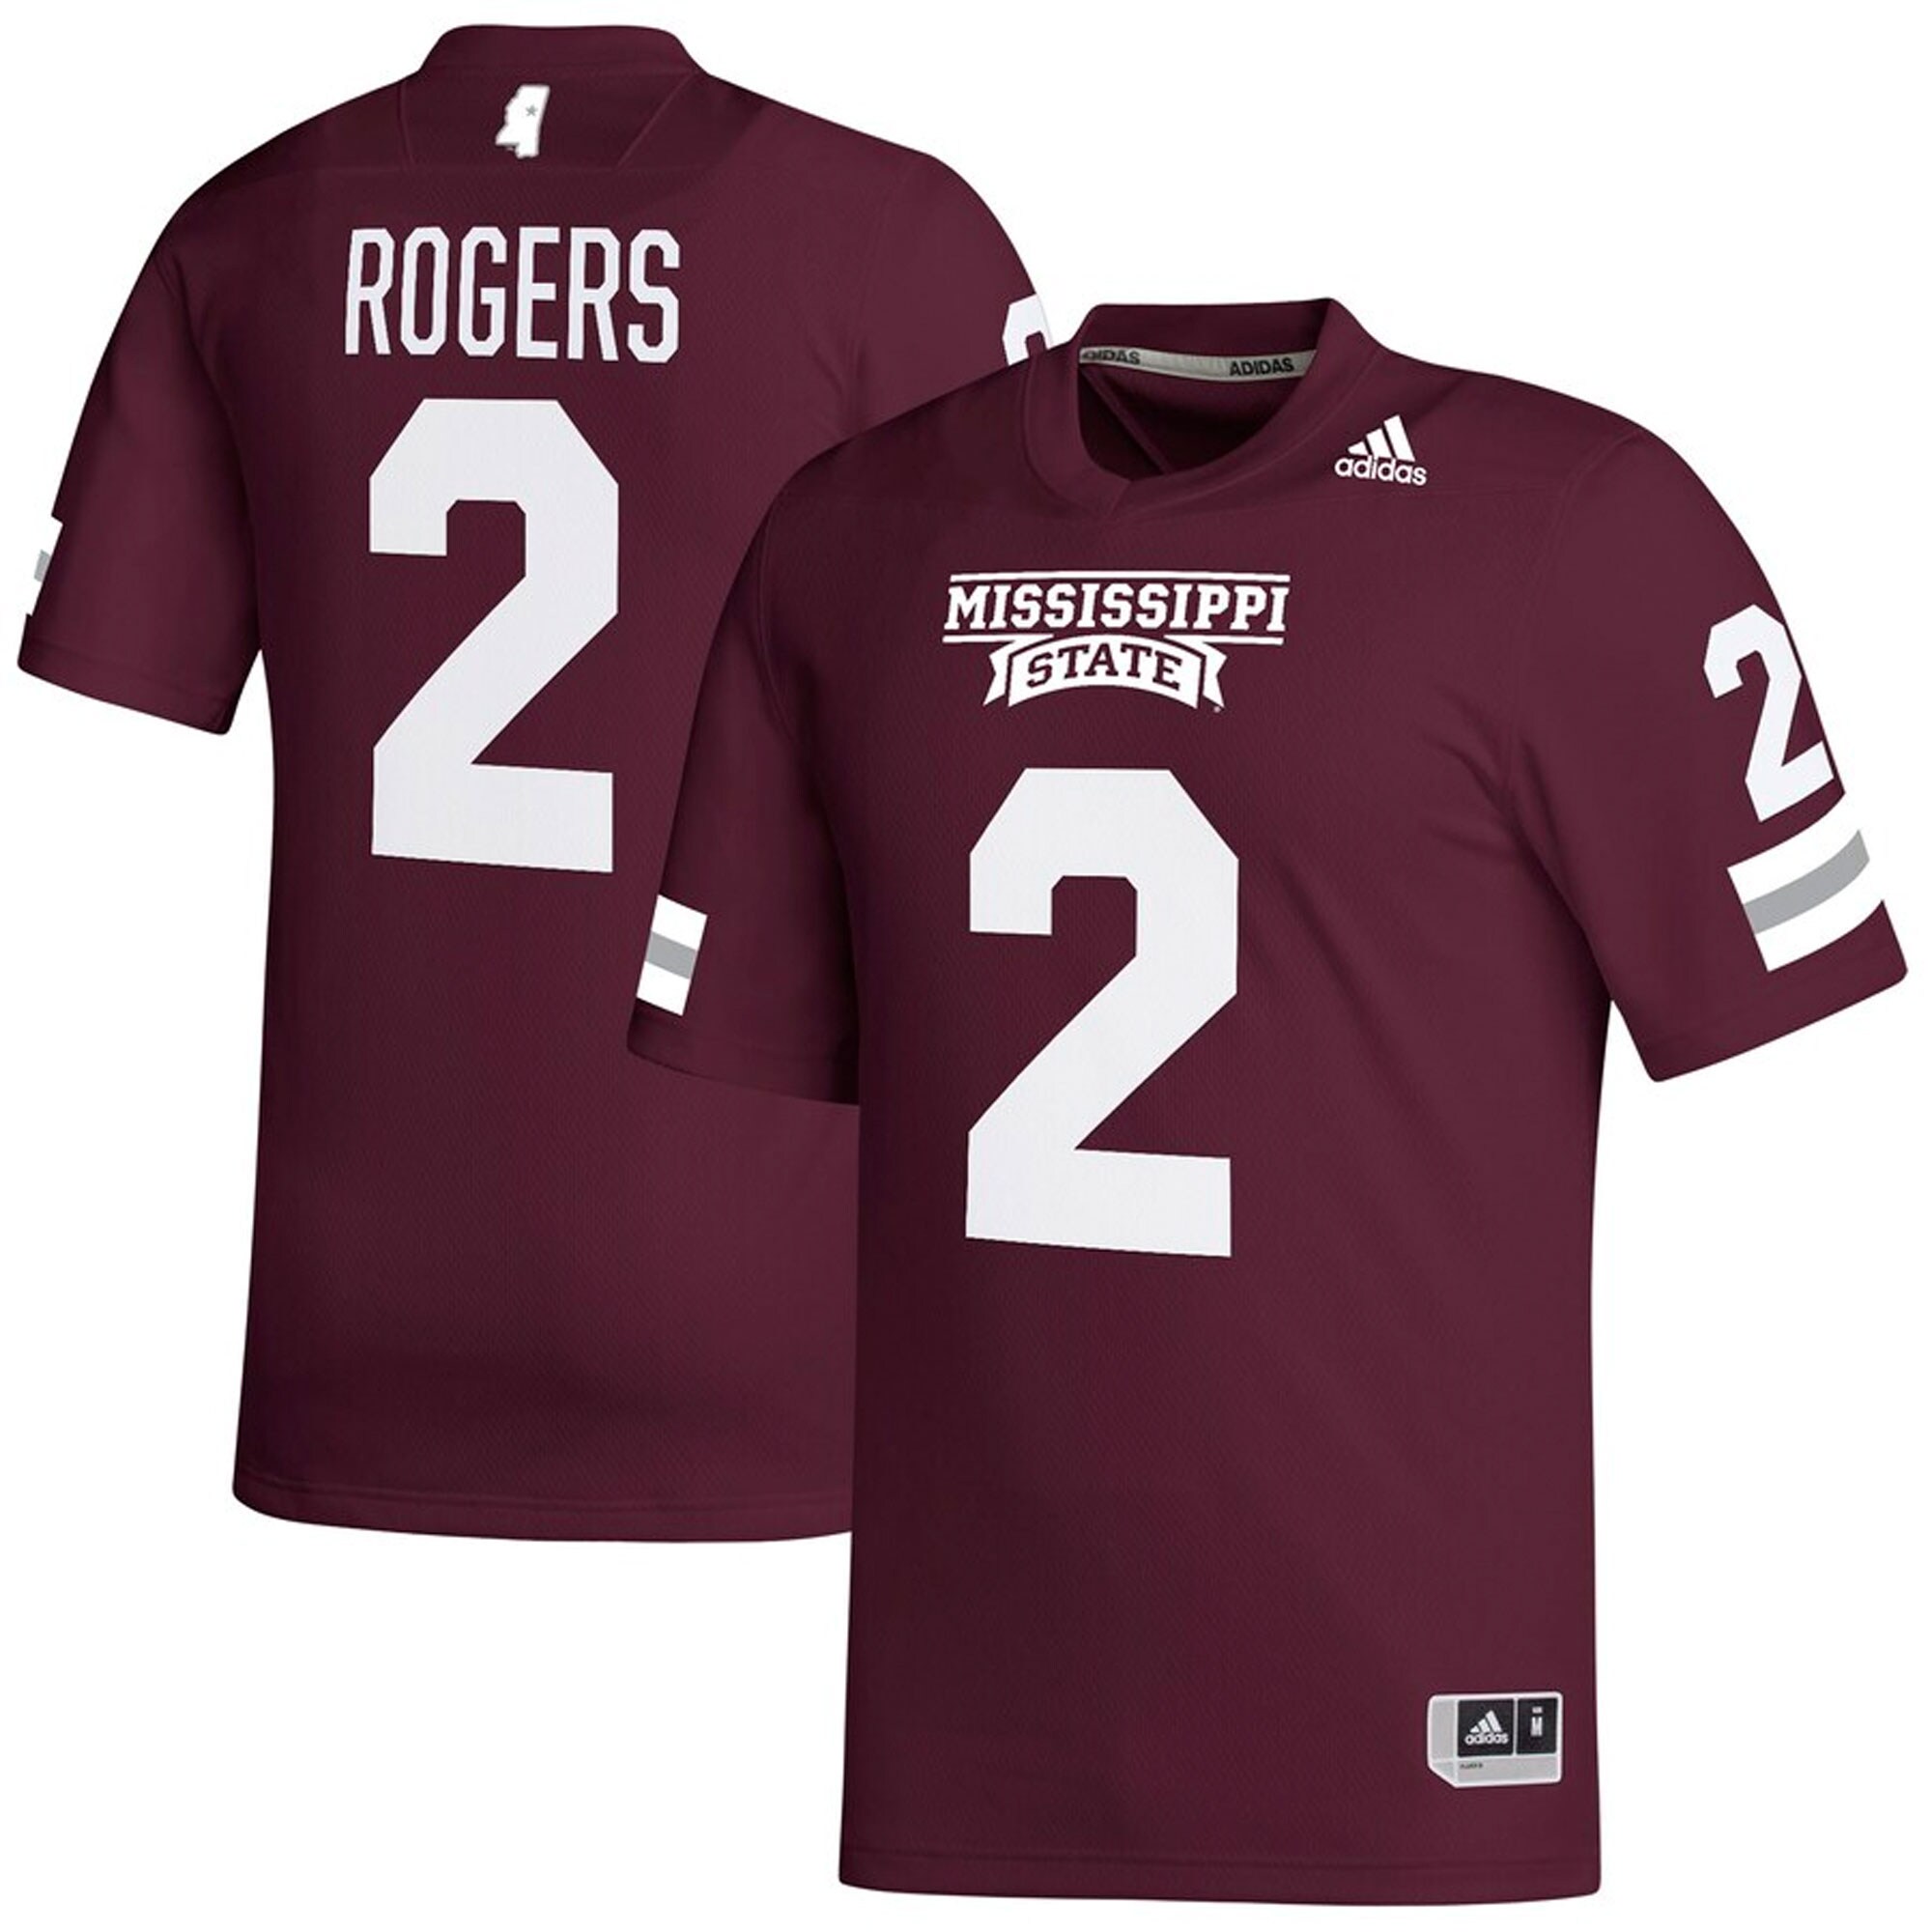 Will Rogers Mississippi State Bulldogs   Nil Replica  Football Shirts Jersey - Maroon For Youth Women Men